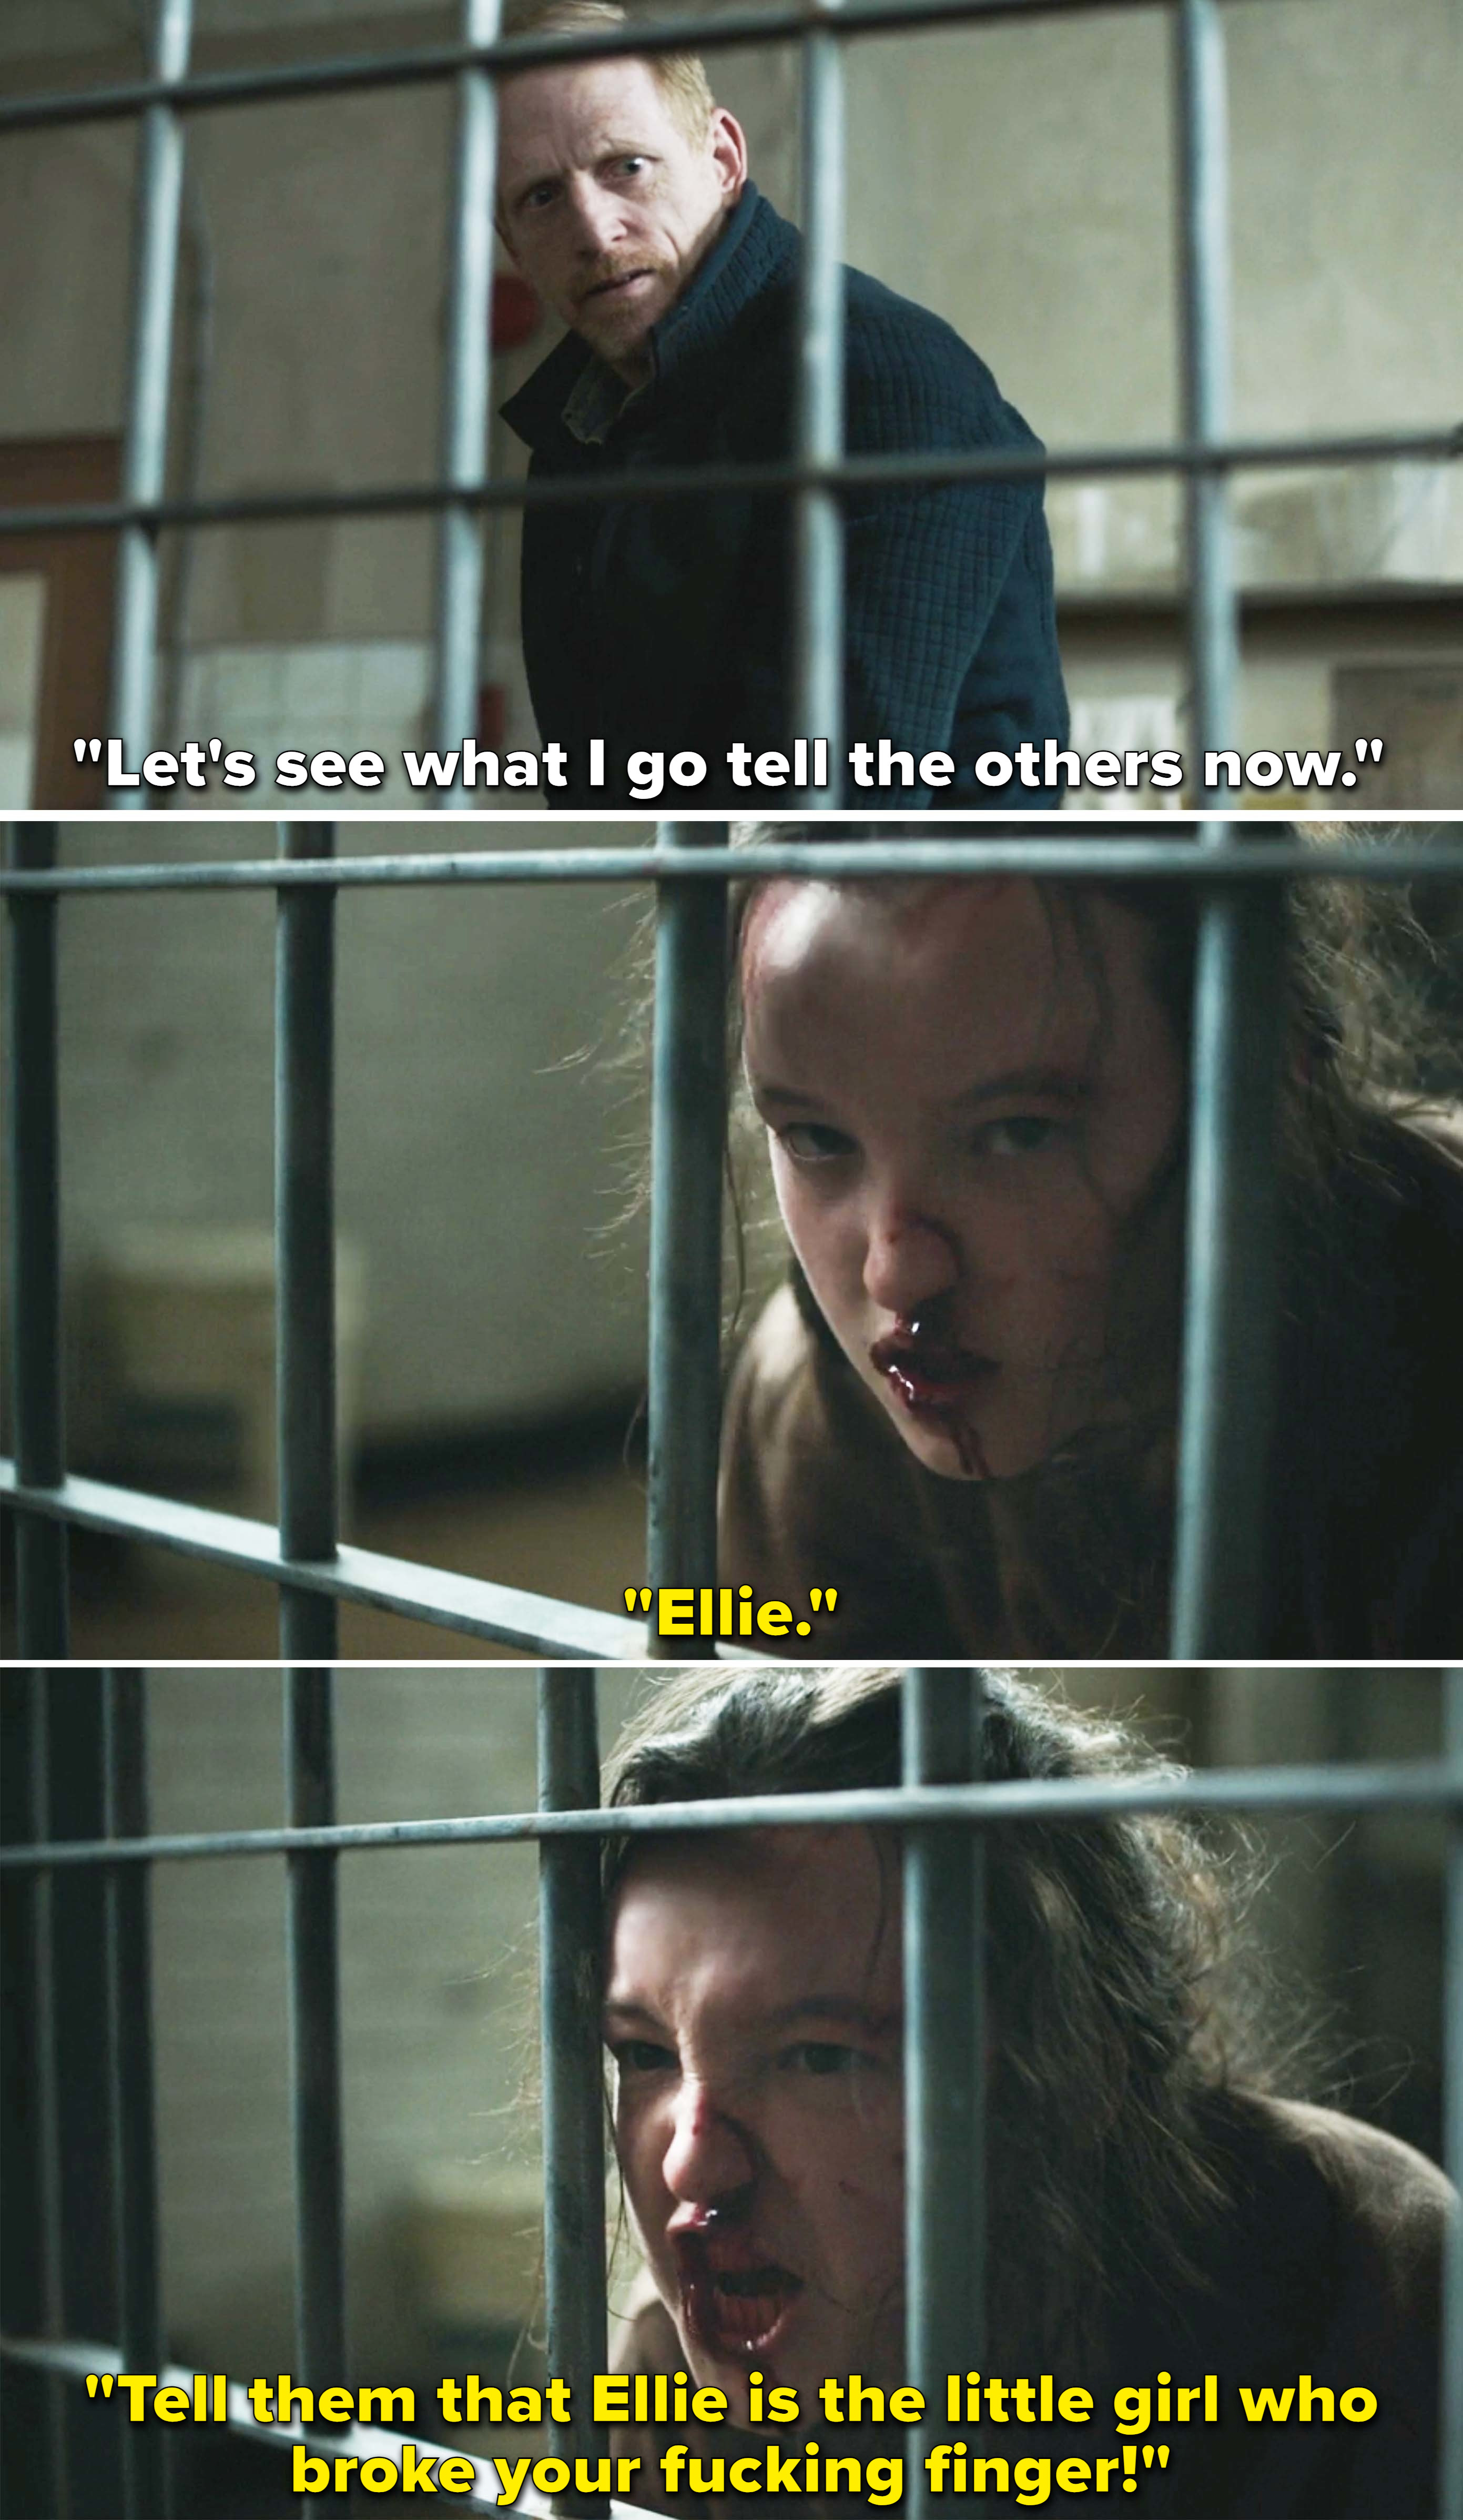 David threatening Ellie, who is bloodied and behind bars, and responds with &quot;Tell them that Ellie is the little girl who broke your fucking finger!&quot;